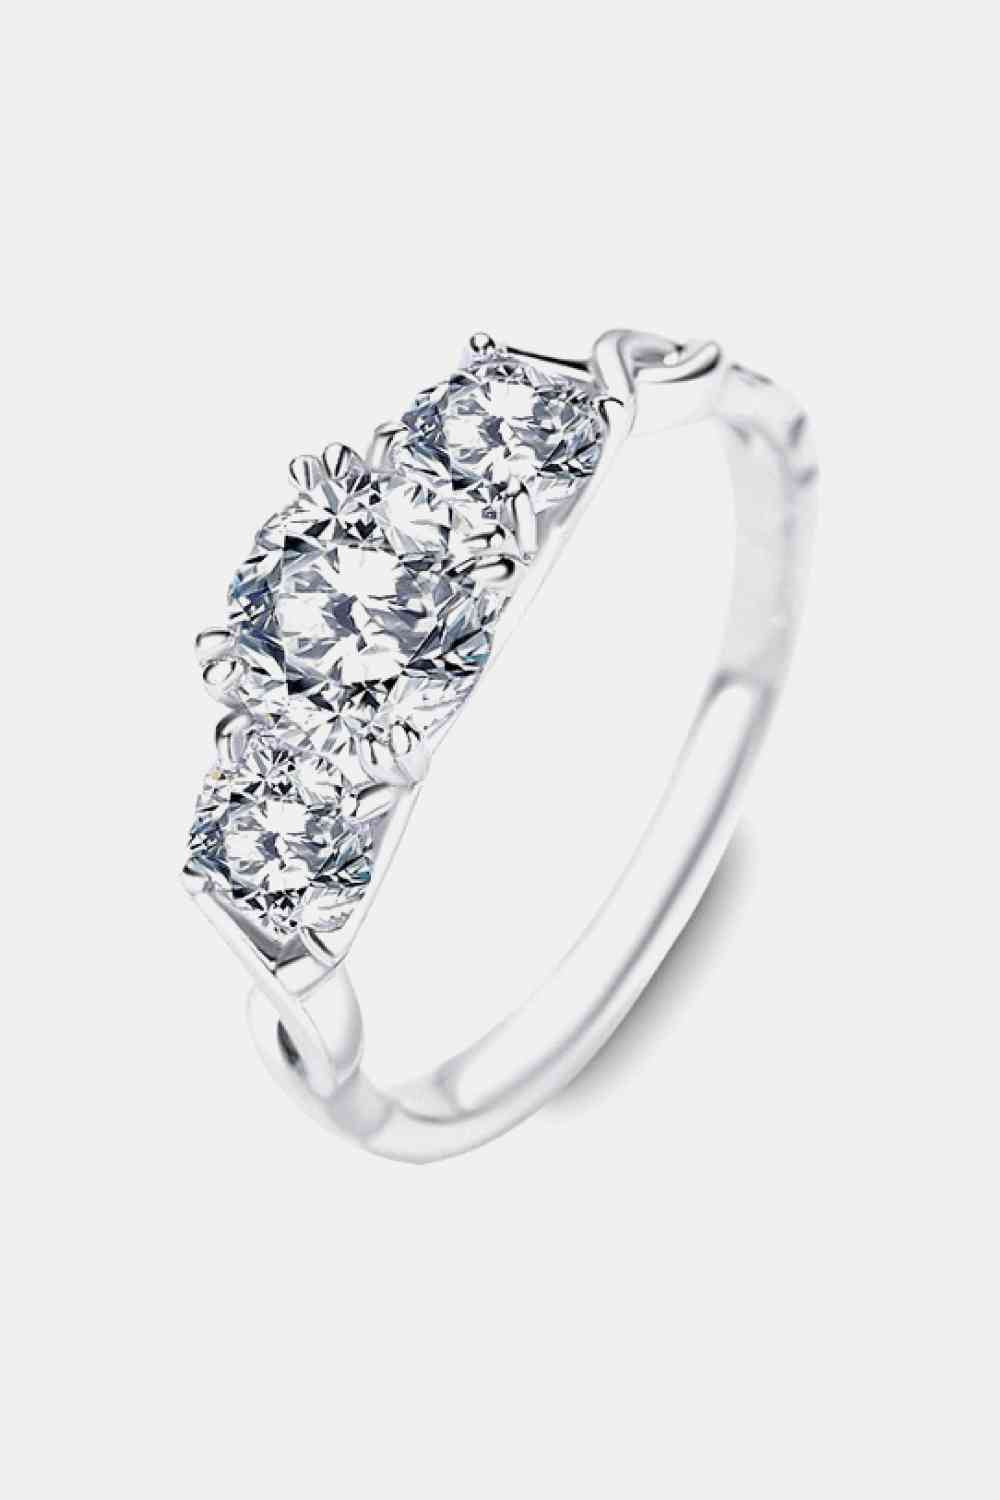 1 Carat Moissanite 925 Sterling Silver Ring - ChicaLux